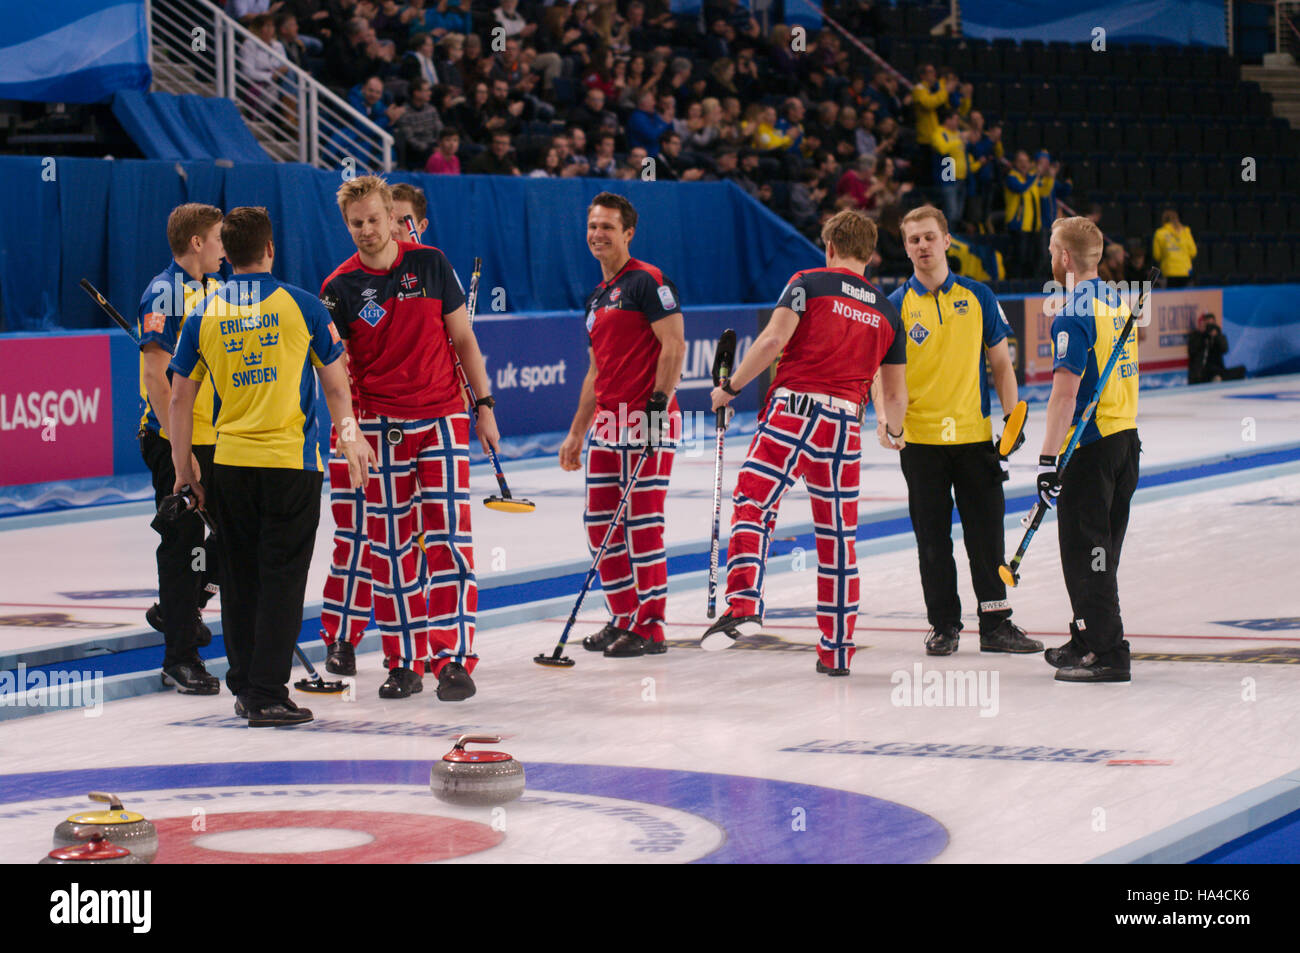 Braehead Arena, Renfrewshire, Scotland, 26 November 2016. Sweden shake hands with Norway after beating them in an extra end to win the Le Gruyère AOP European Curling Championships 2016  Credit:  Colin Edwards / Alamy Live News Stock Photo